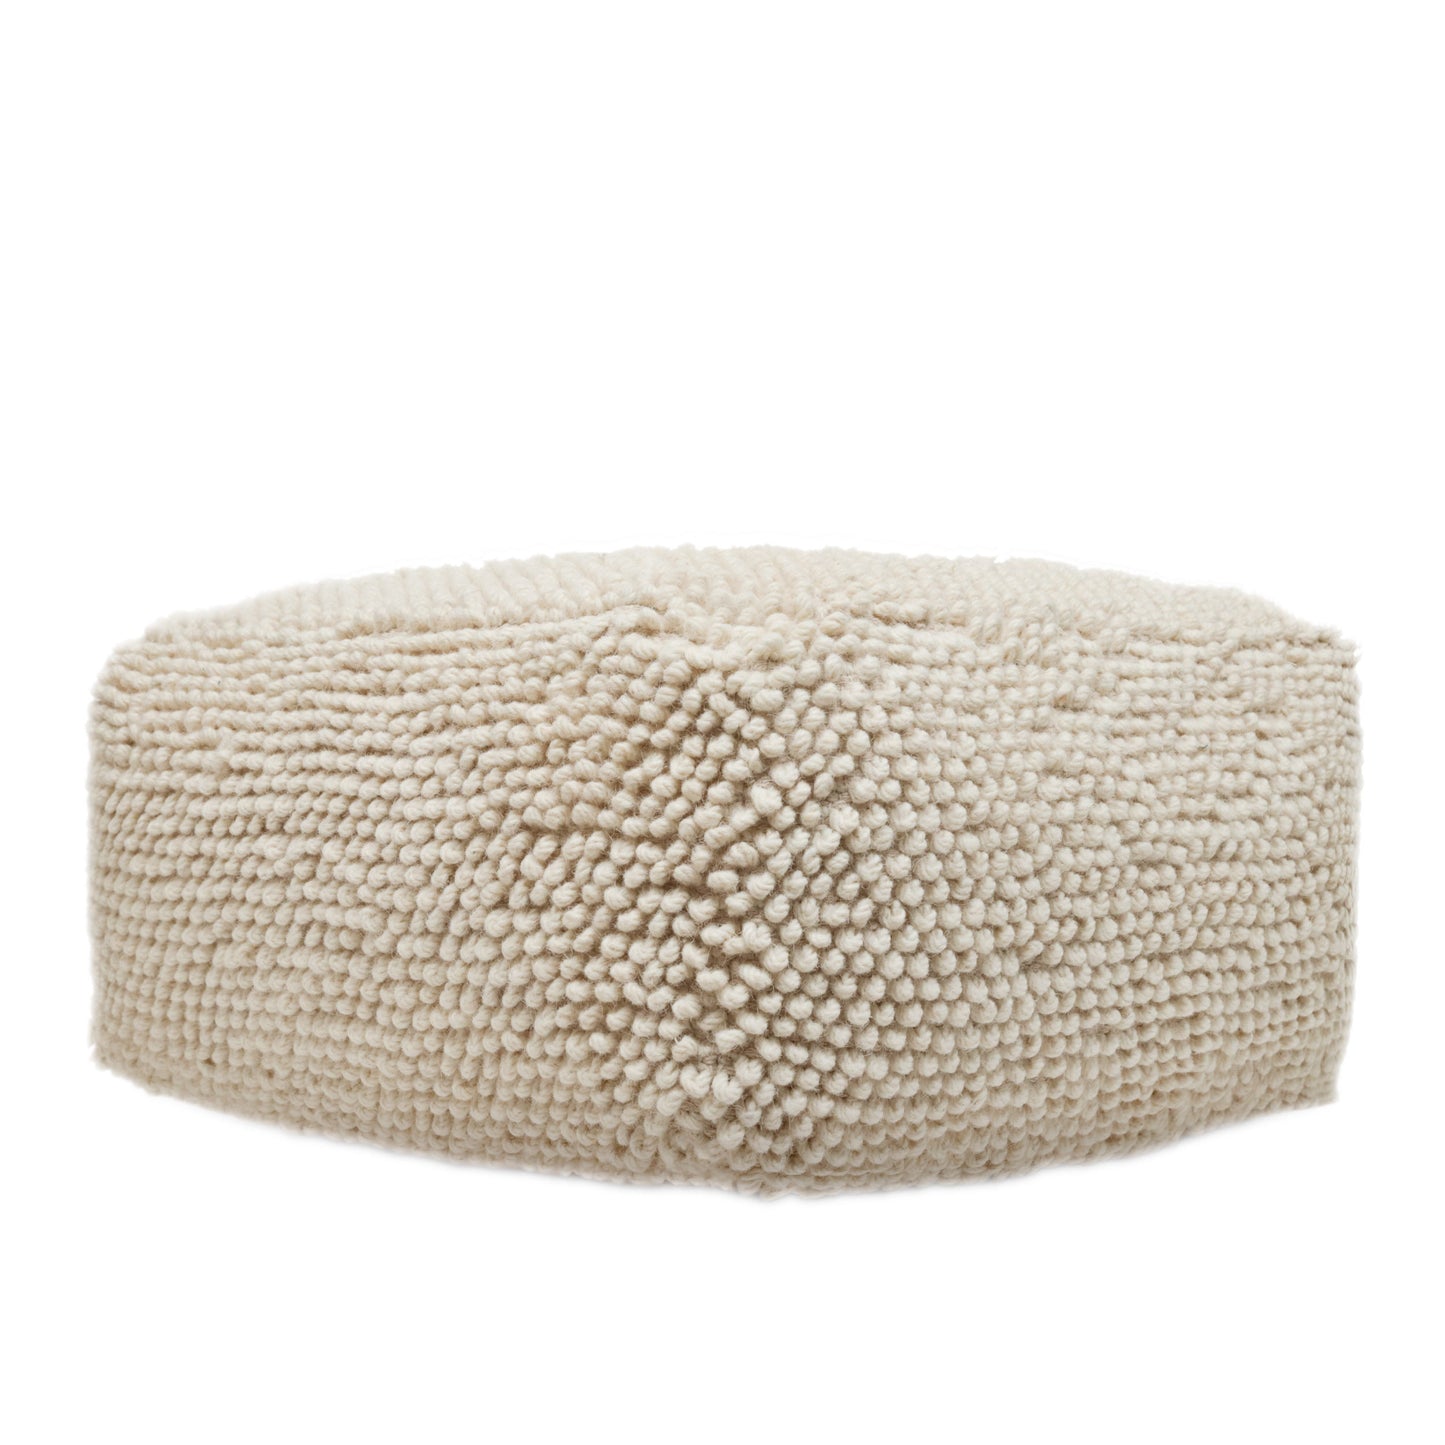 Wilsey Boho Handcrafted Tufted Fabric Square Pouf